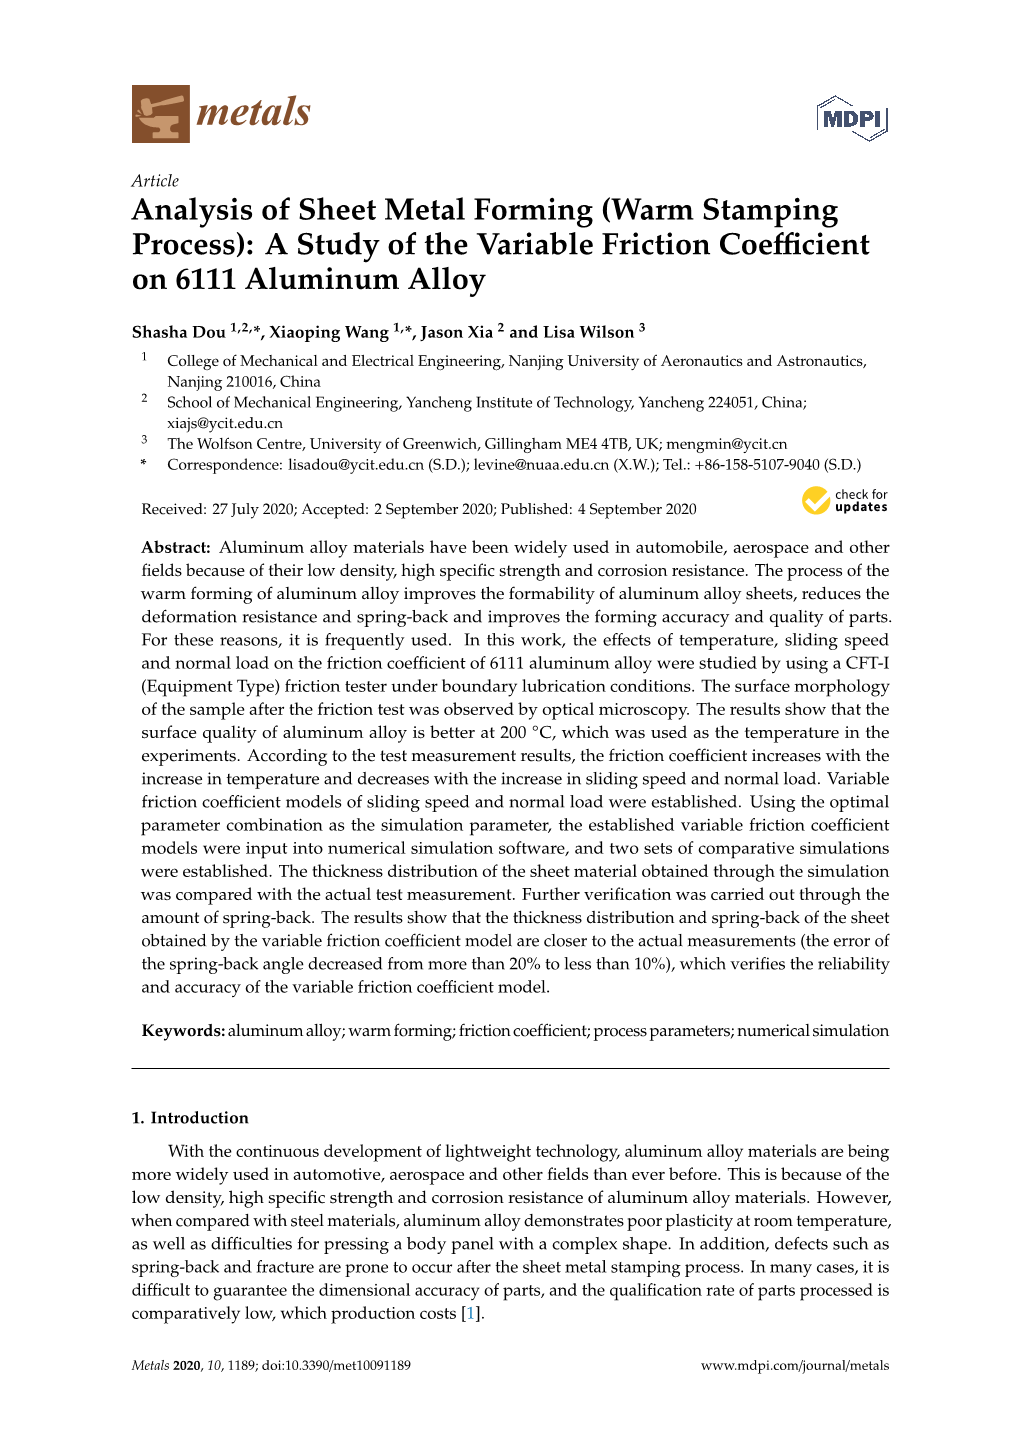 Analysis of Sheet Metal Forming (Warm Stamping Process): a Study of the Variable Friction Coeﬃcient on 6111 Aluminum Alloy